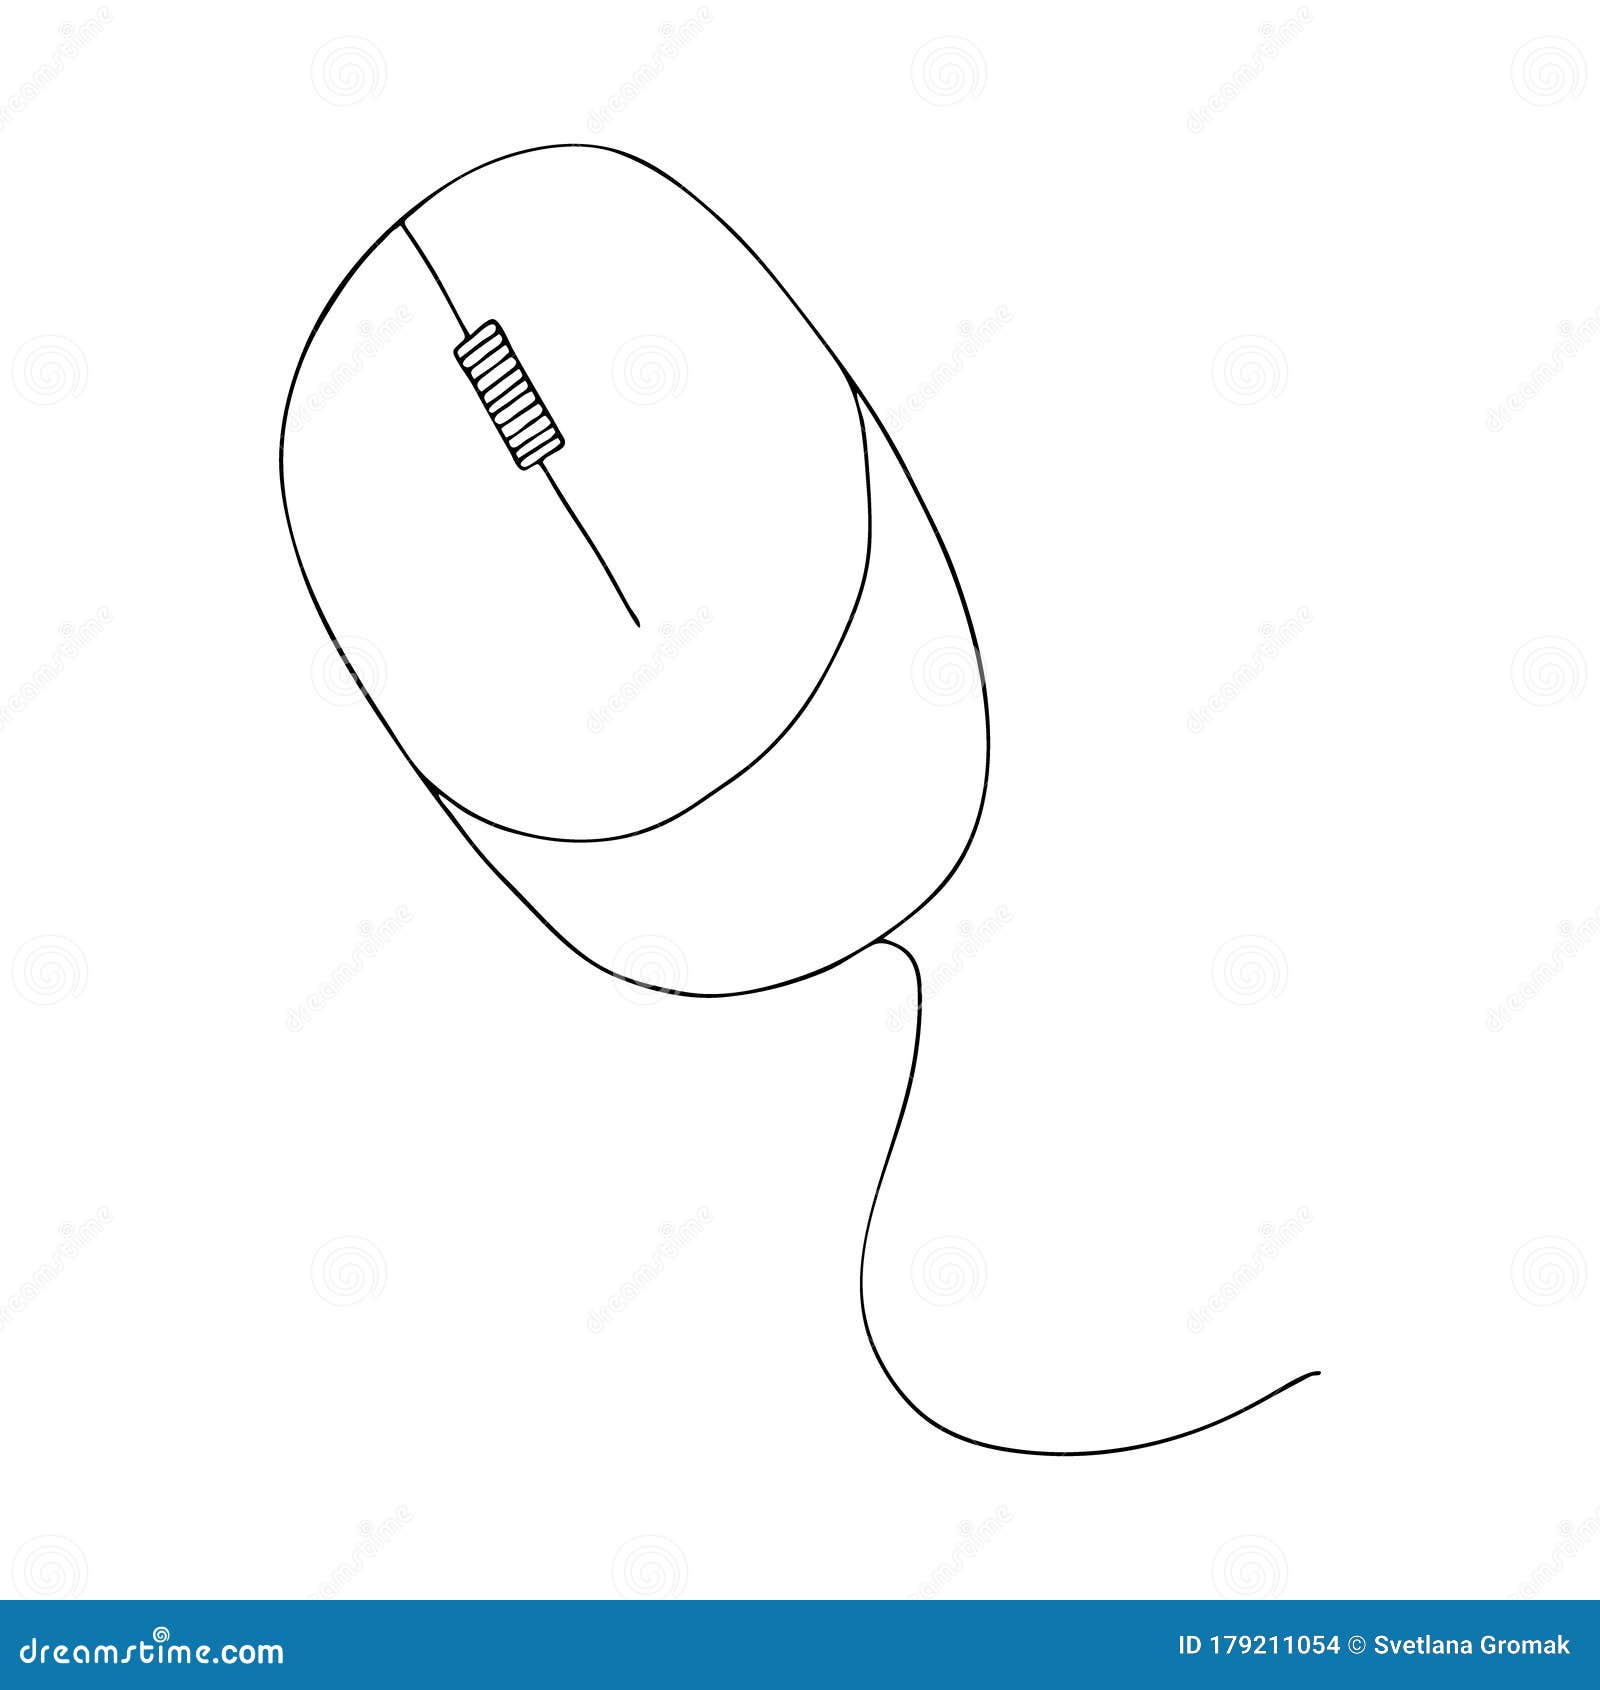 Premium Vector | Sketch drawing of computer mouse-saigonsouth.com.vn